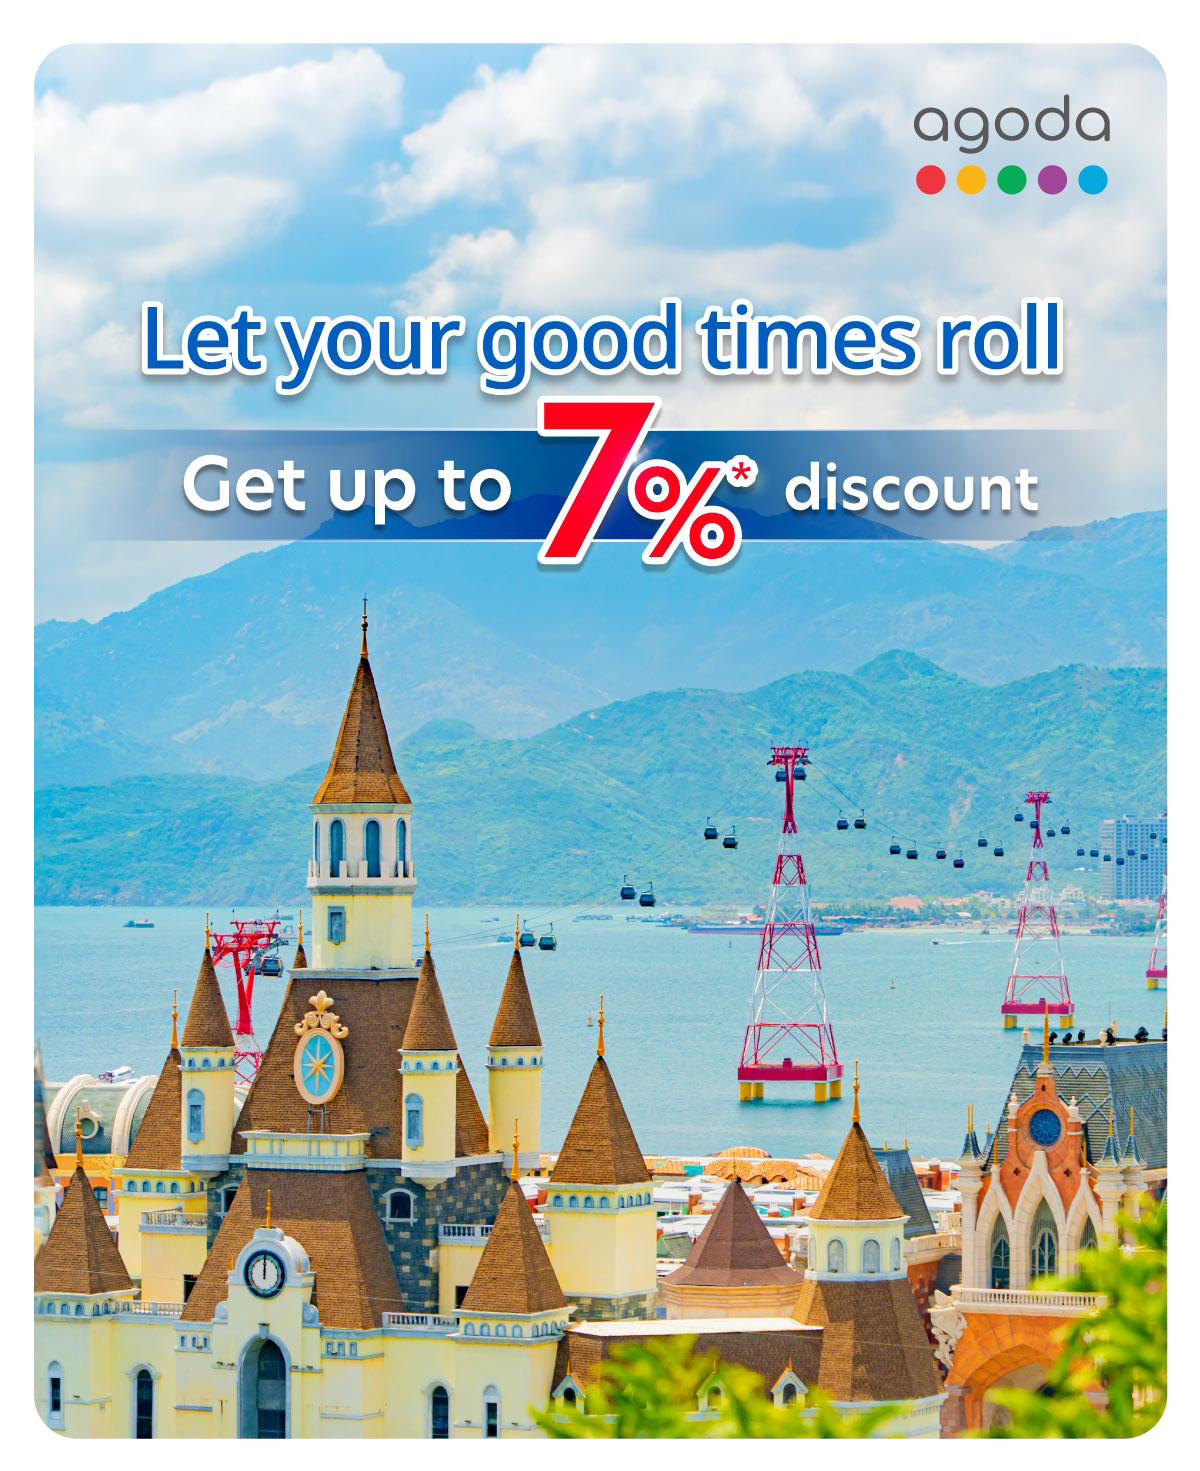 Get up to 7% hotels discount when booking via Agoda and paying with UOB Credit Card or TMRW Credit Card